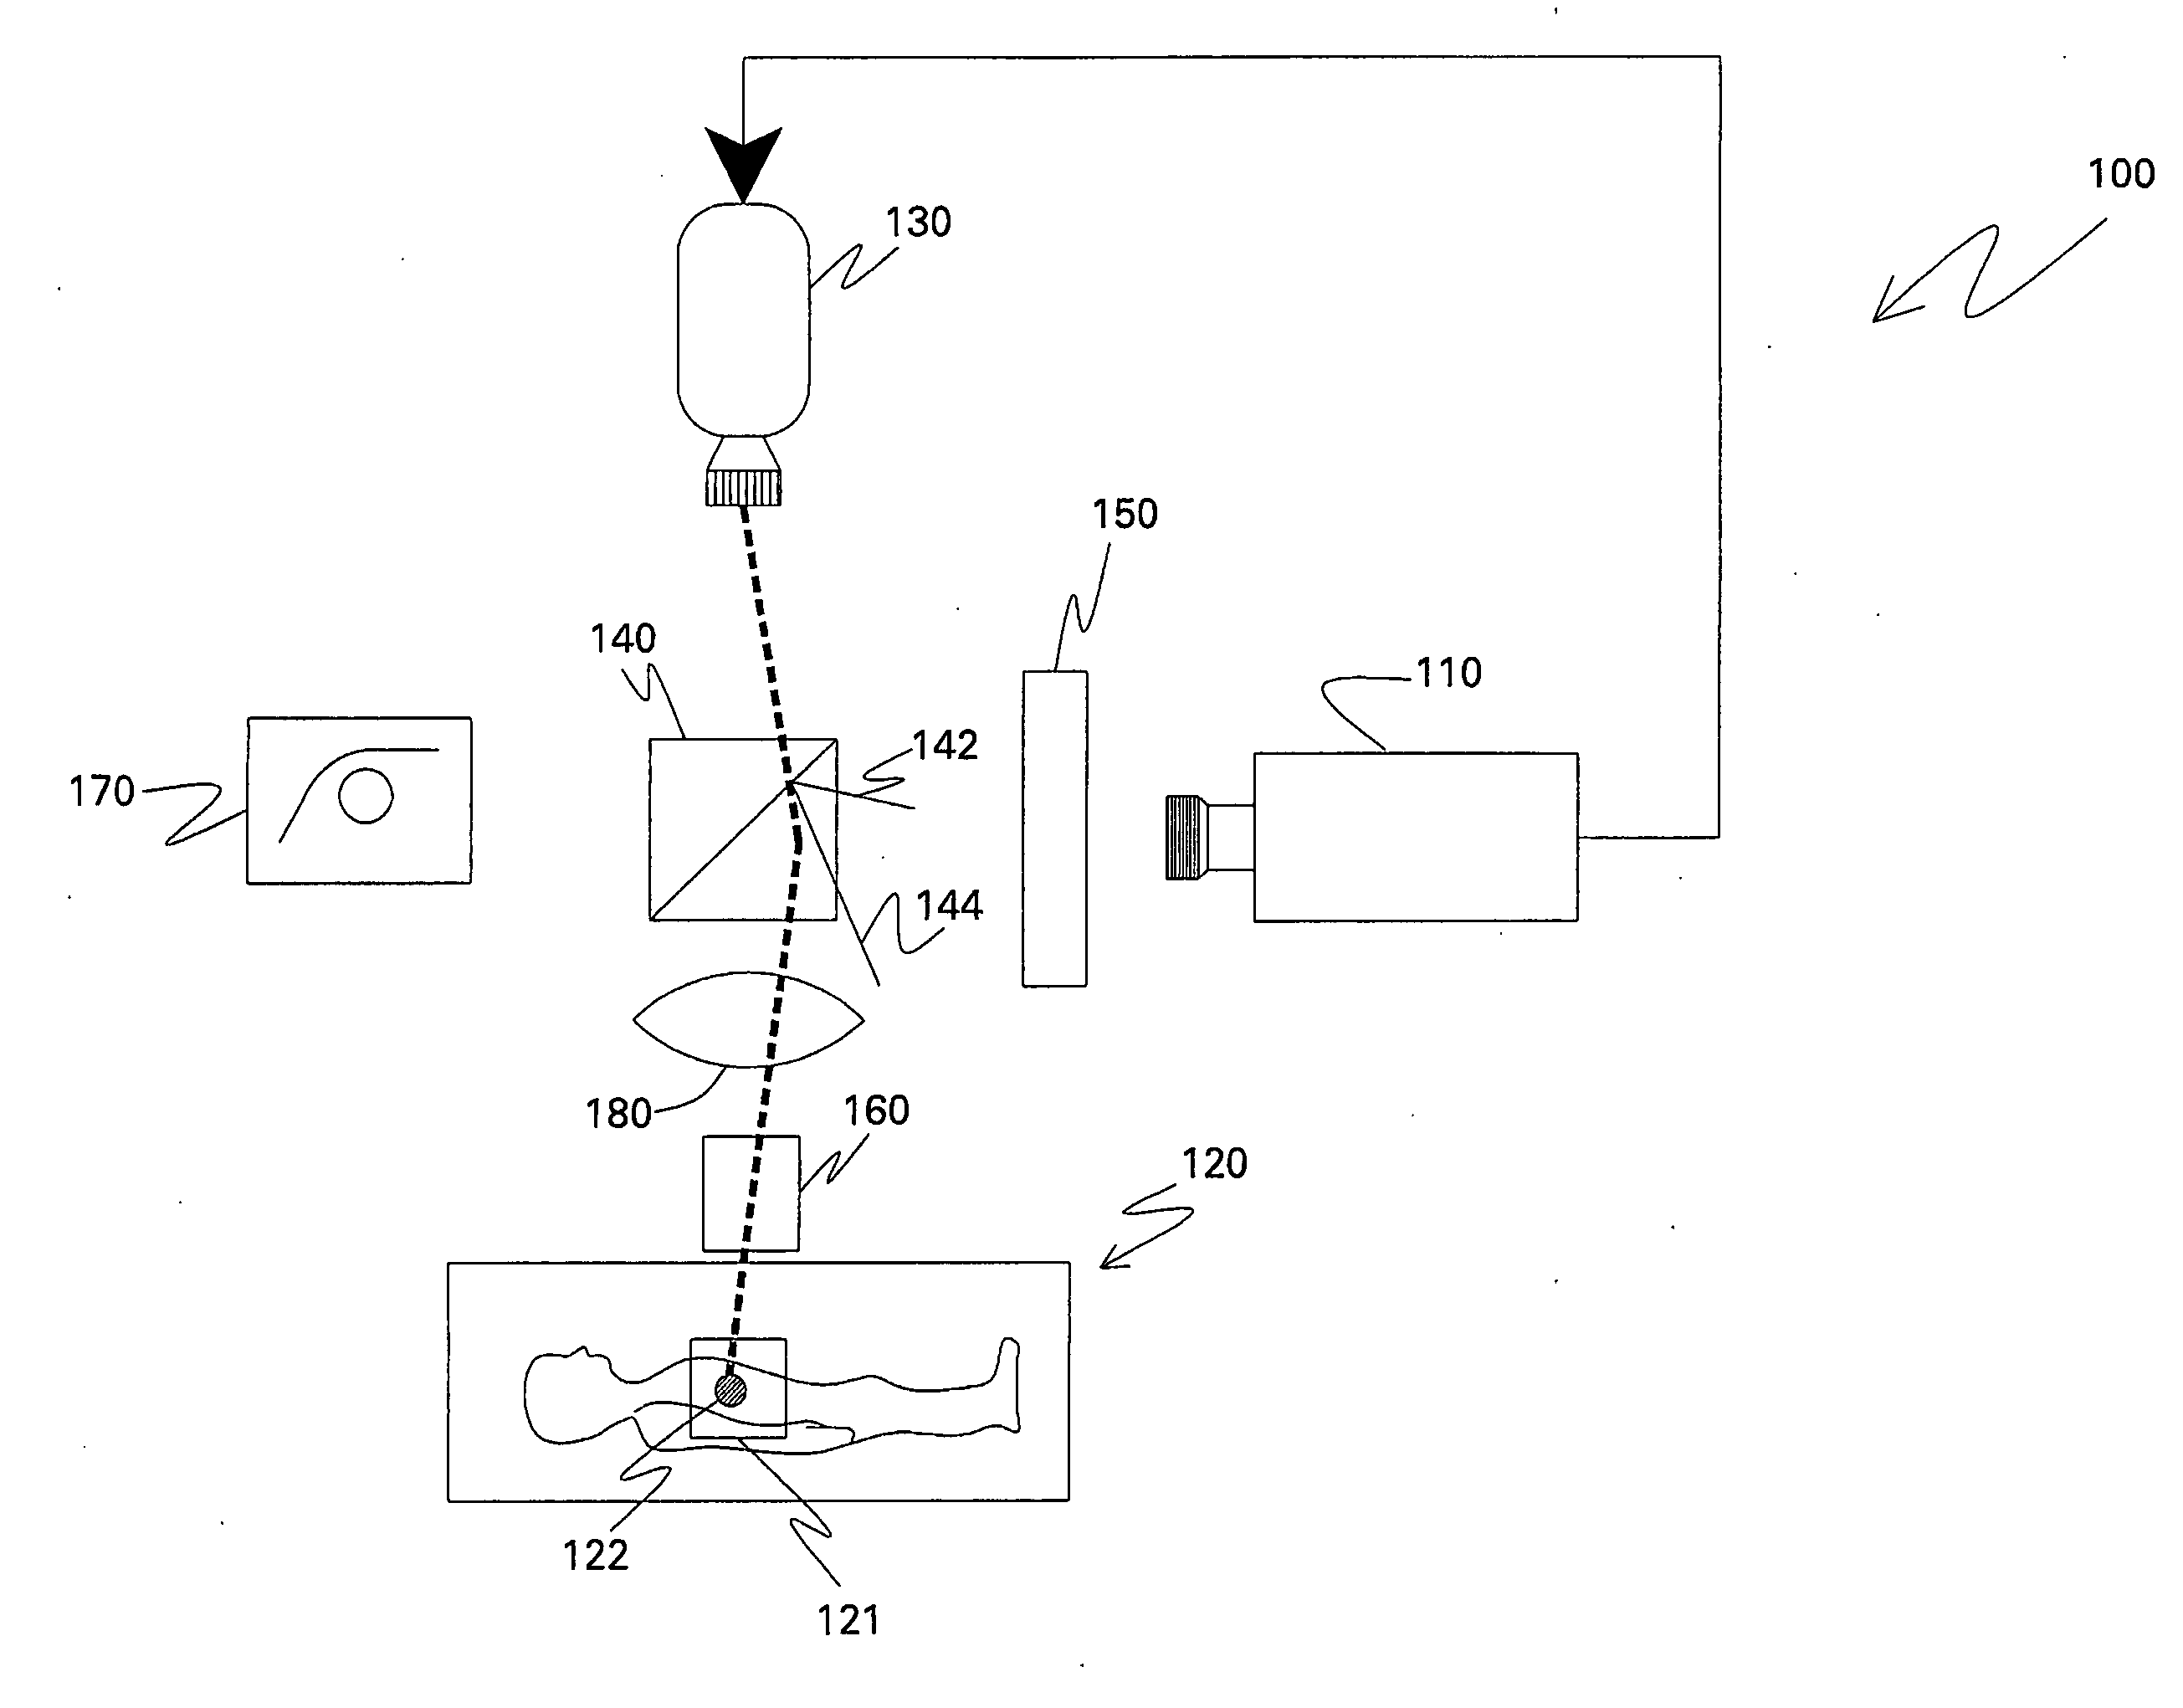 Optical imaging systems and methods